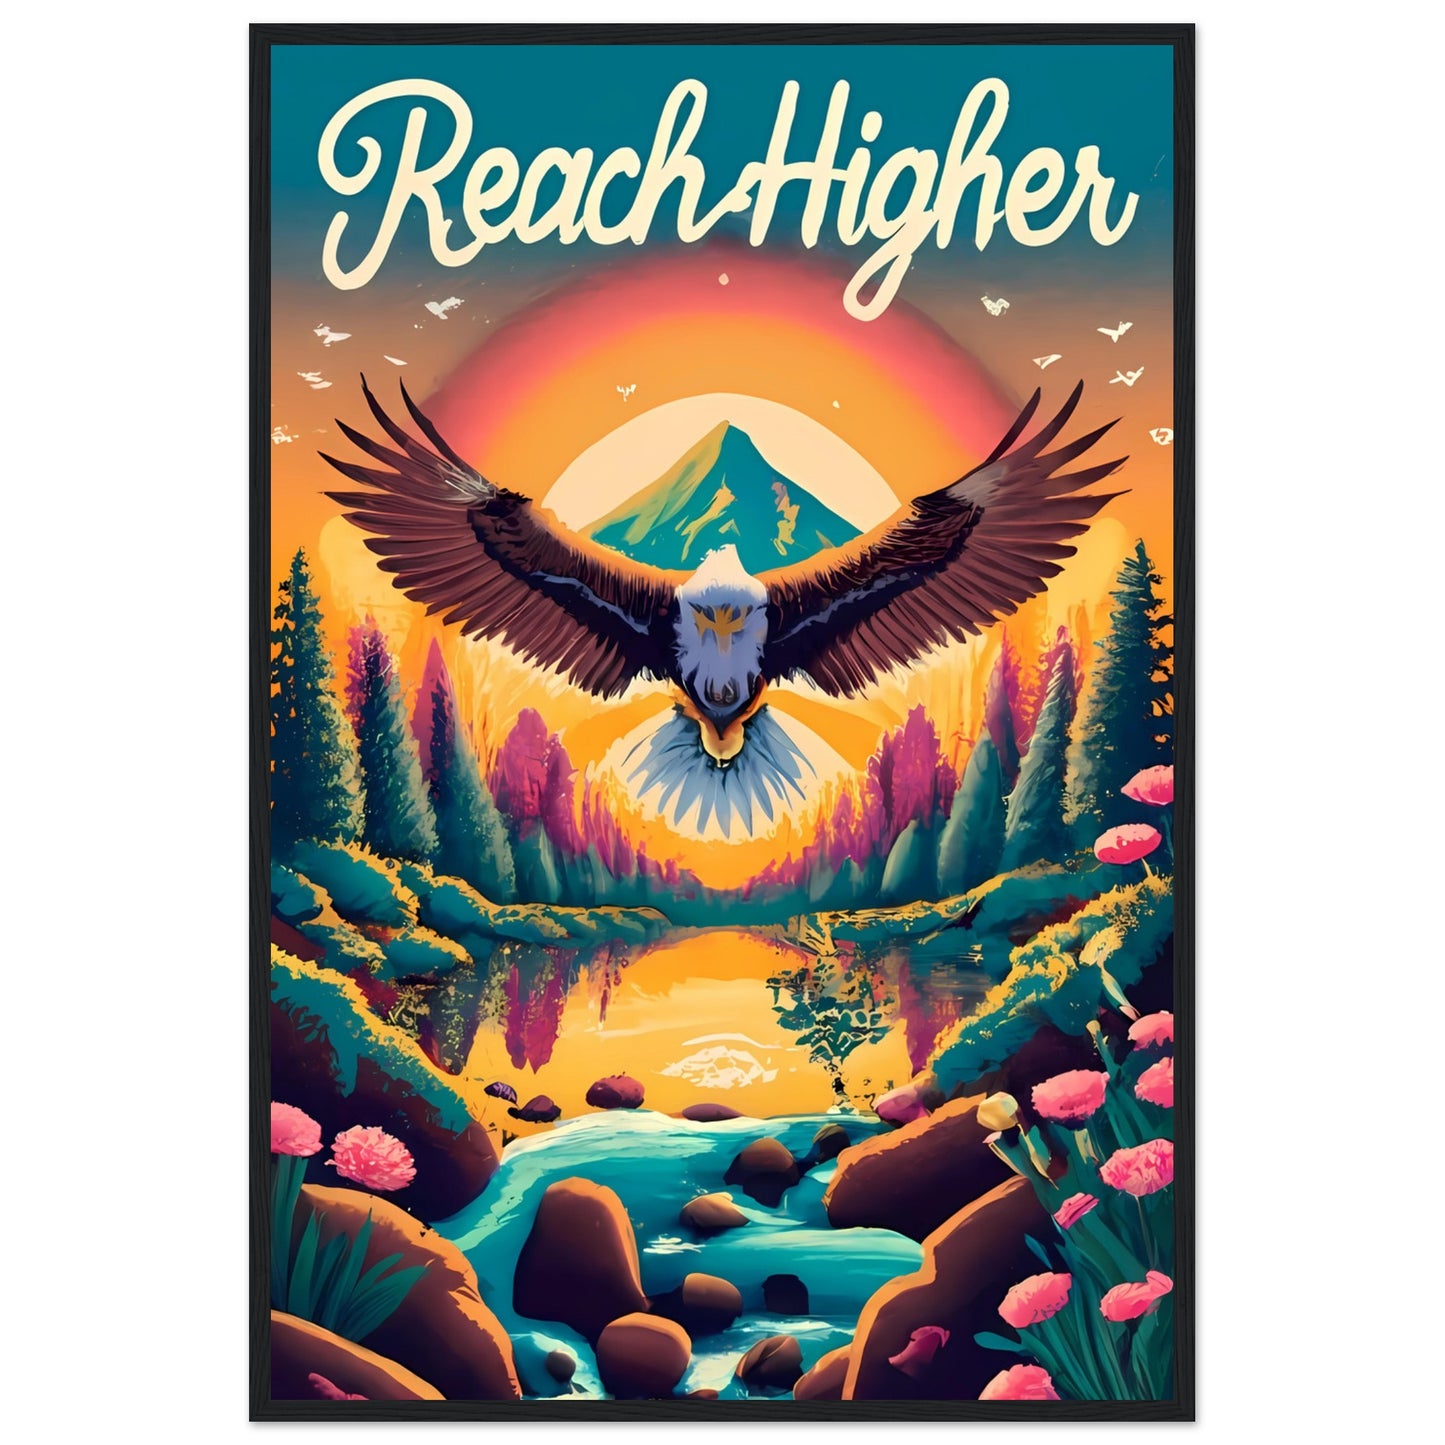 Reach Higher Retro Style Framed Poster with Isaiah 40:31, Eagle Flying, Sunset